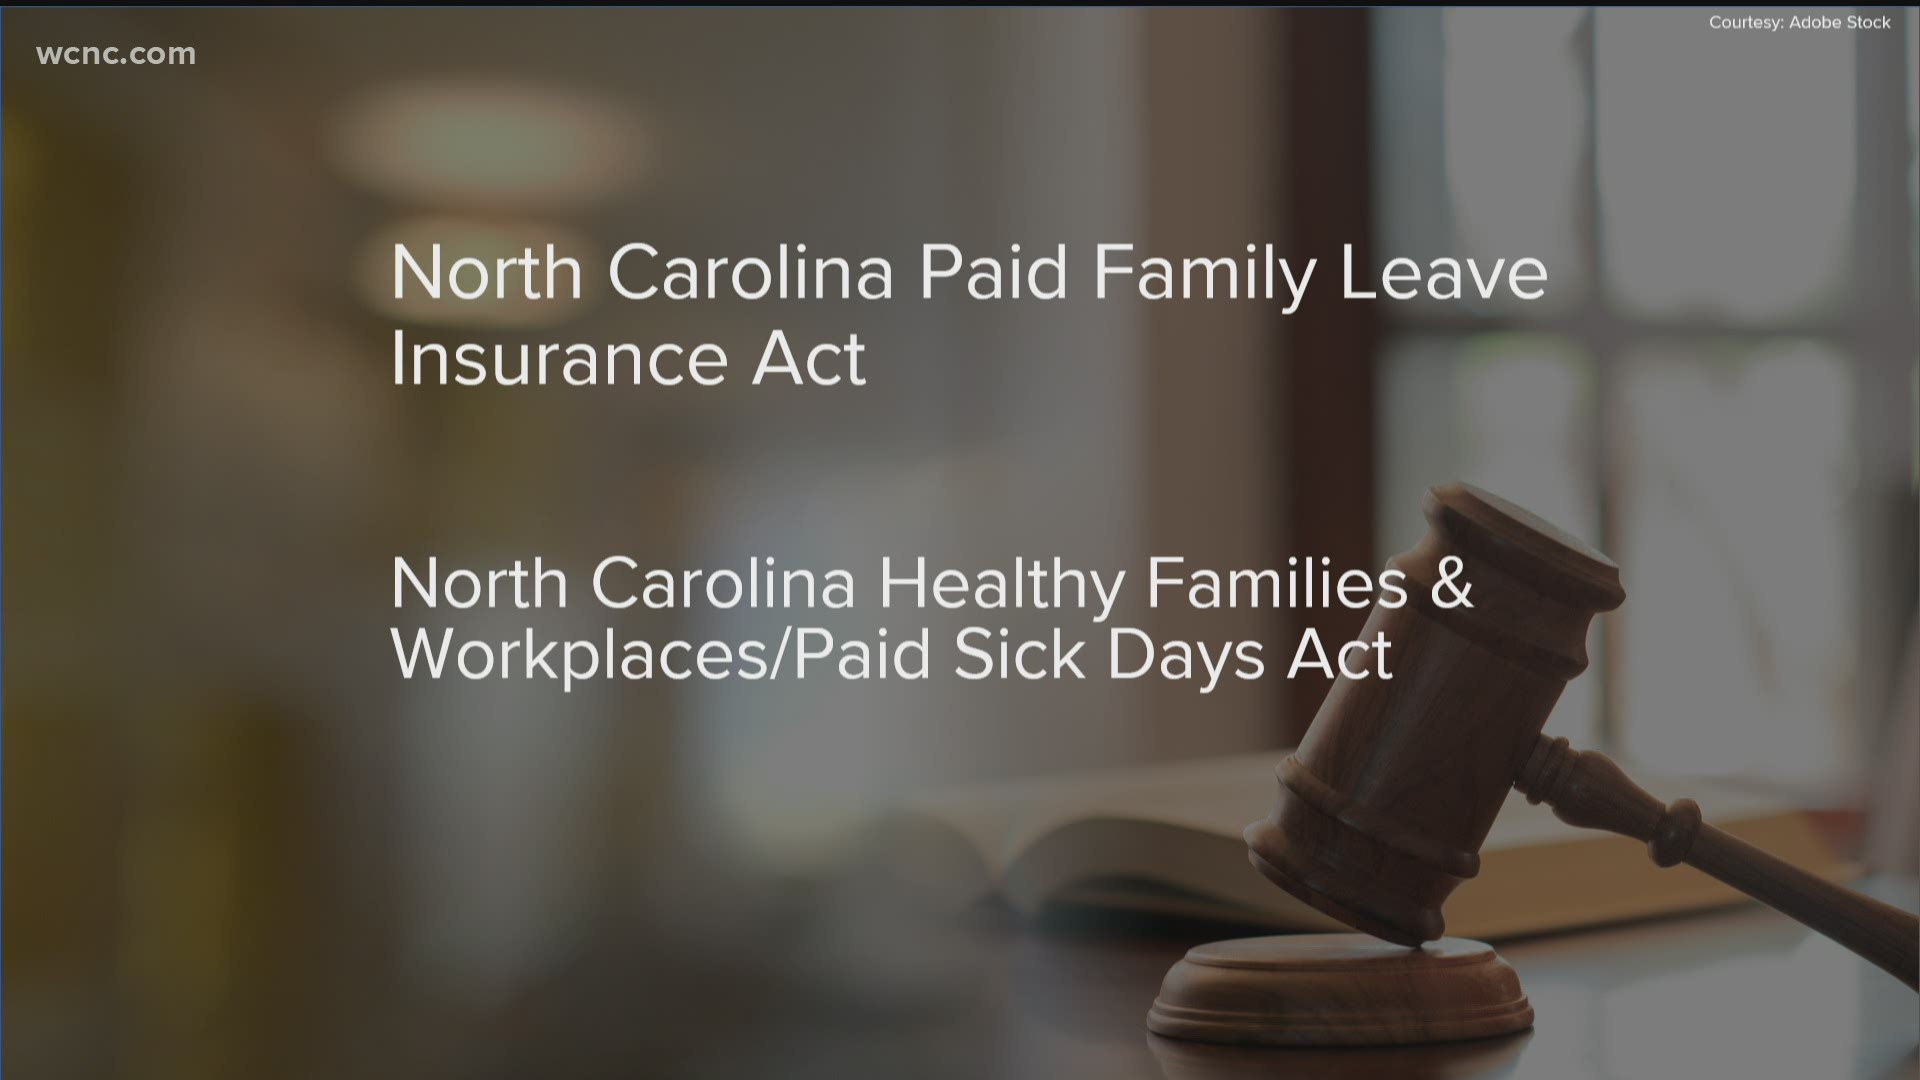 North Carolina lawmakers will discuss and debate two paid leave bills in the General Assembly this week.